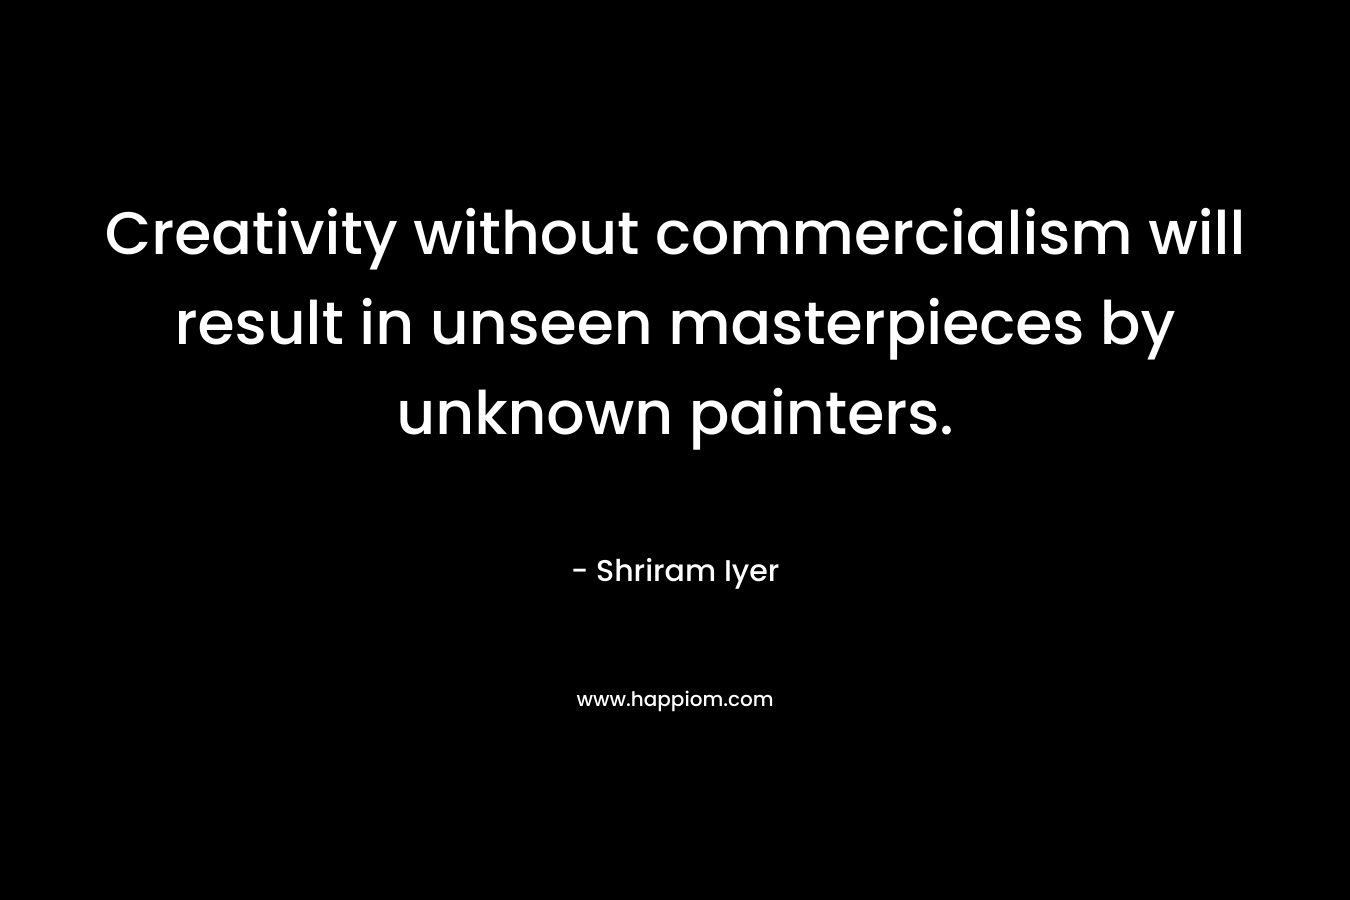 Creativity without commercialism will result in unseen masterpieces by unknown painters. – Shriram Iyer